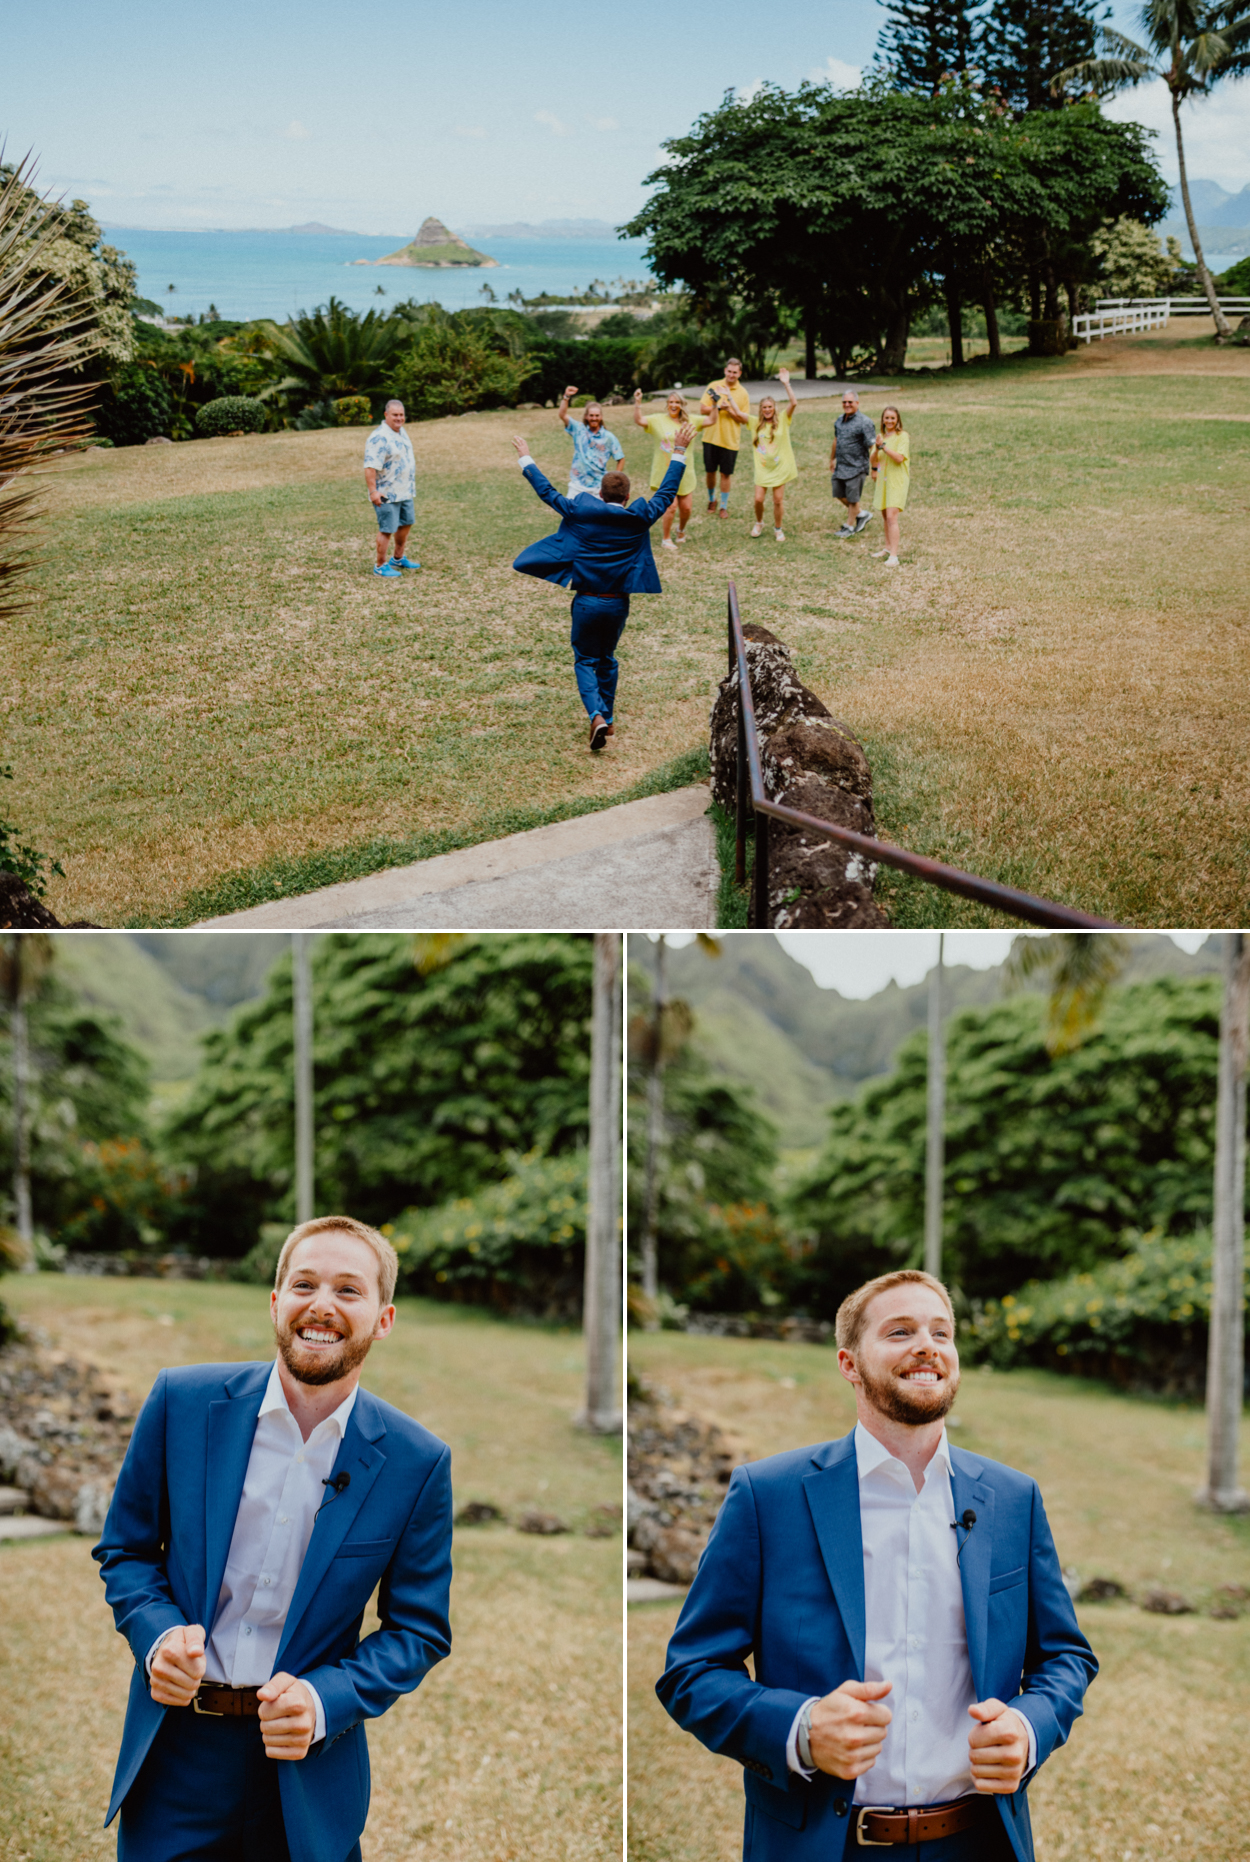 Excited groom waiting for his bride Jurassic Park themed wedding